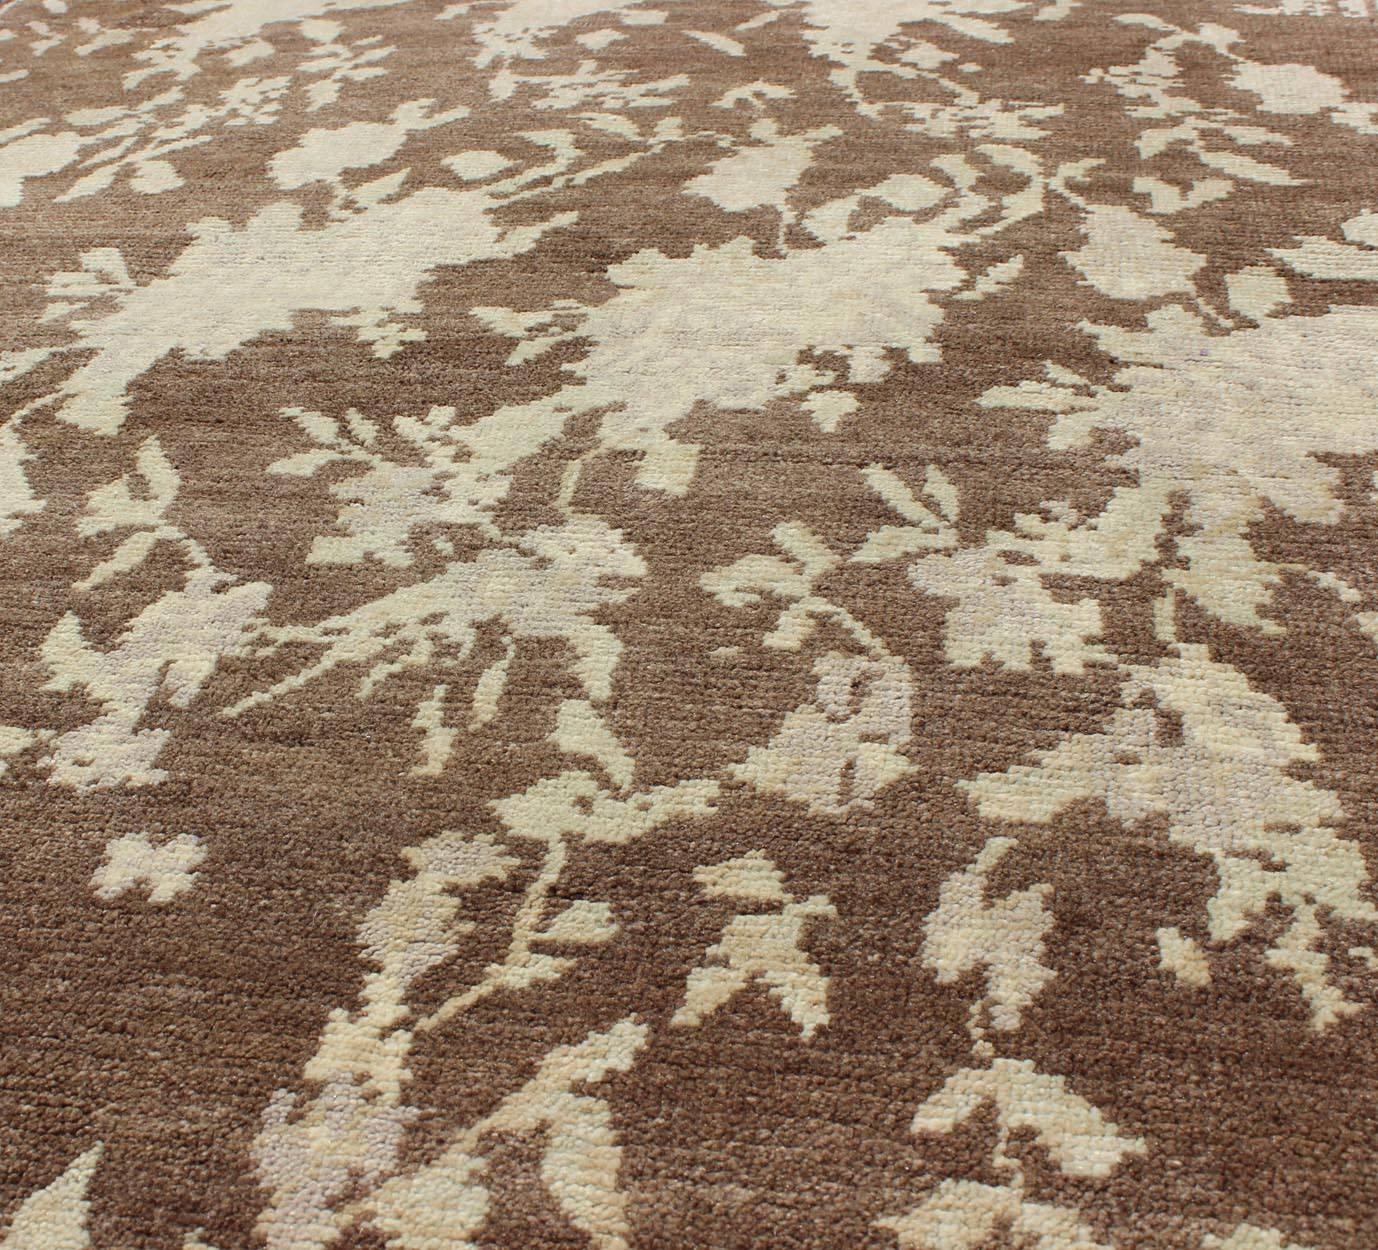 Mid-20th Century Mocha Vintage Turkish Oushak Rug with Free-Flowing Green & Cream Flower Blossoms For Sale